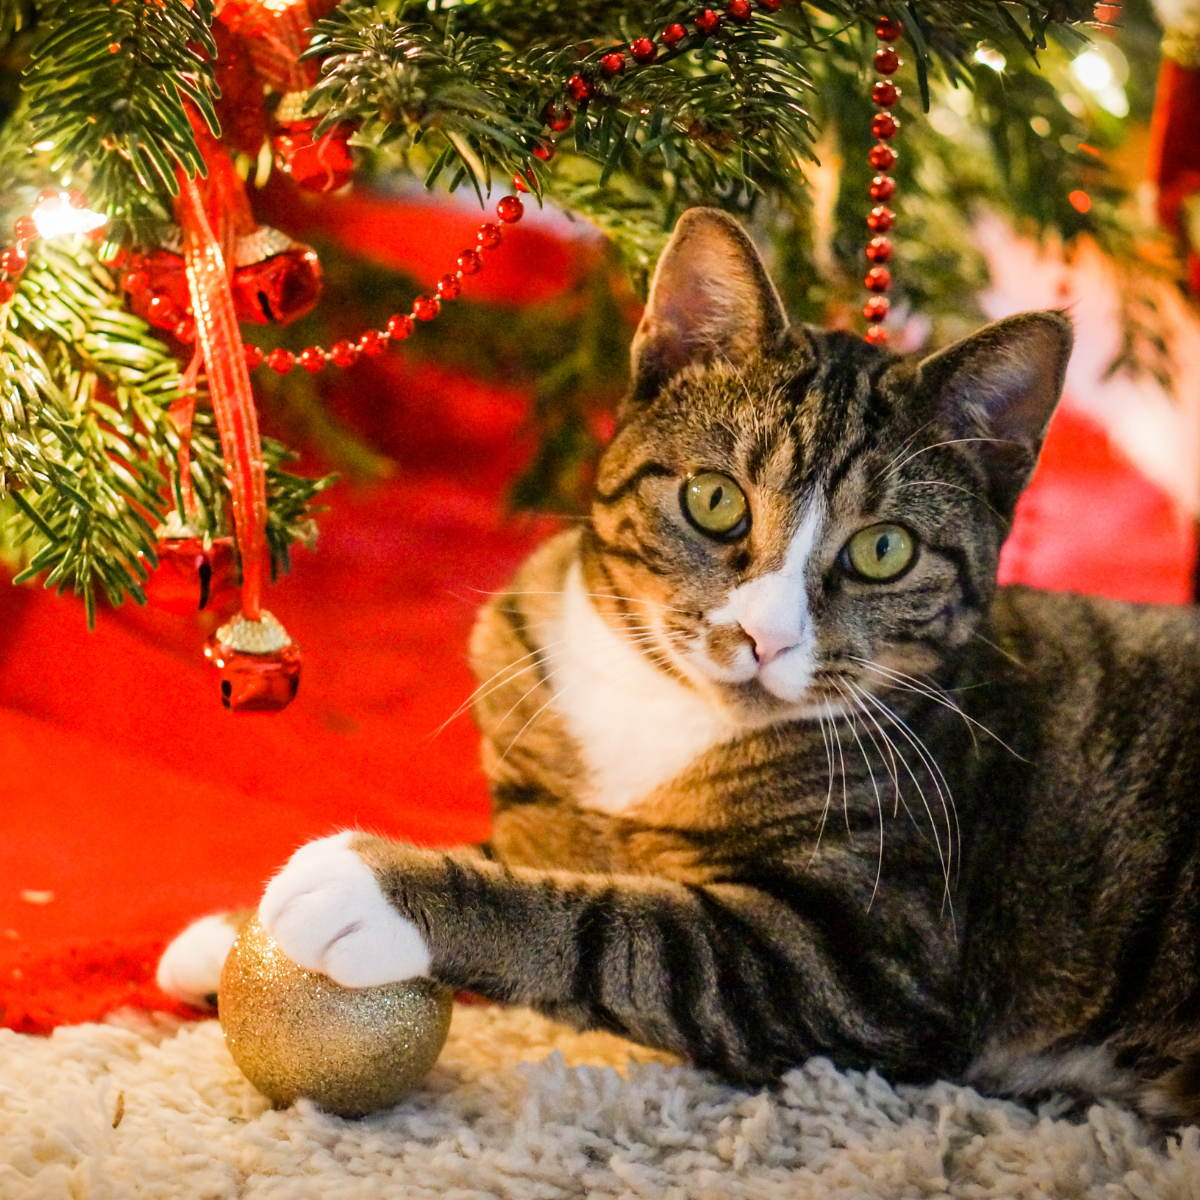 Cat with Ornament by Christmas Tree